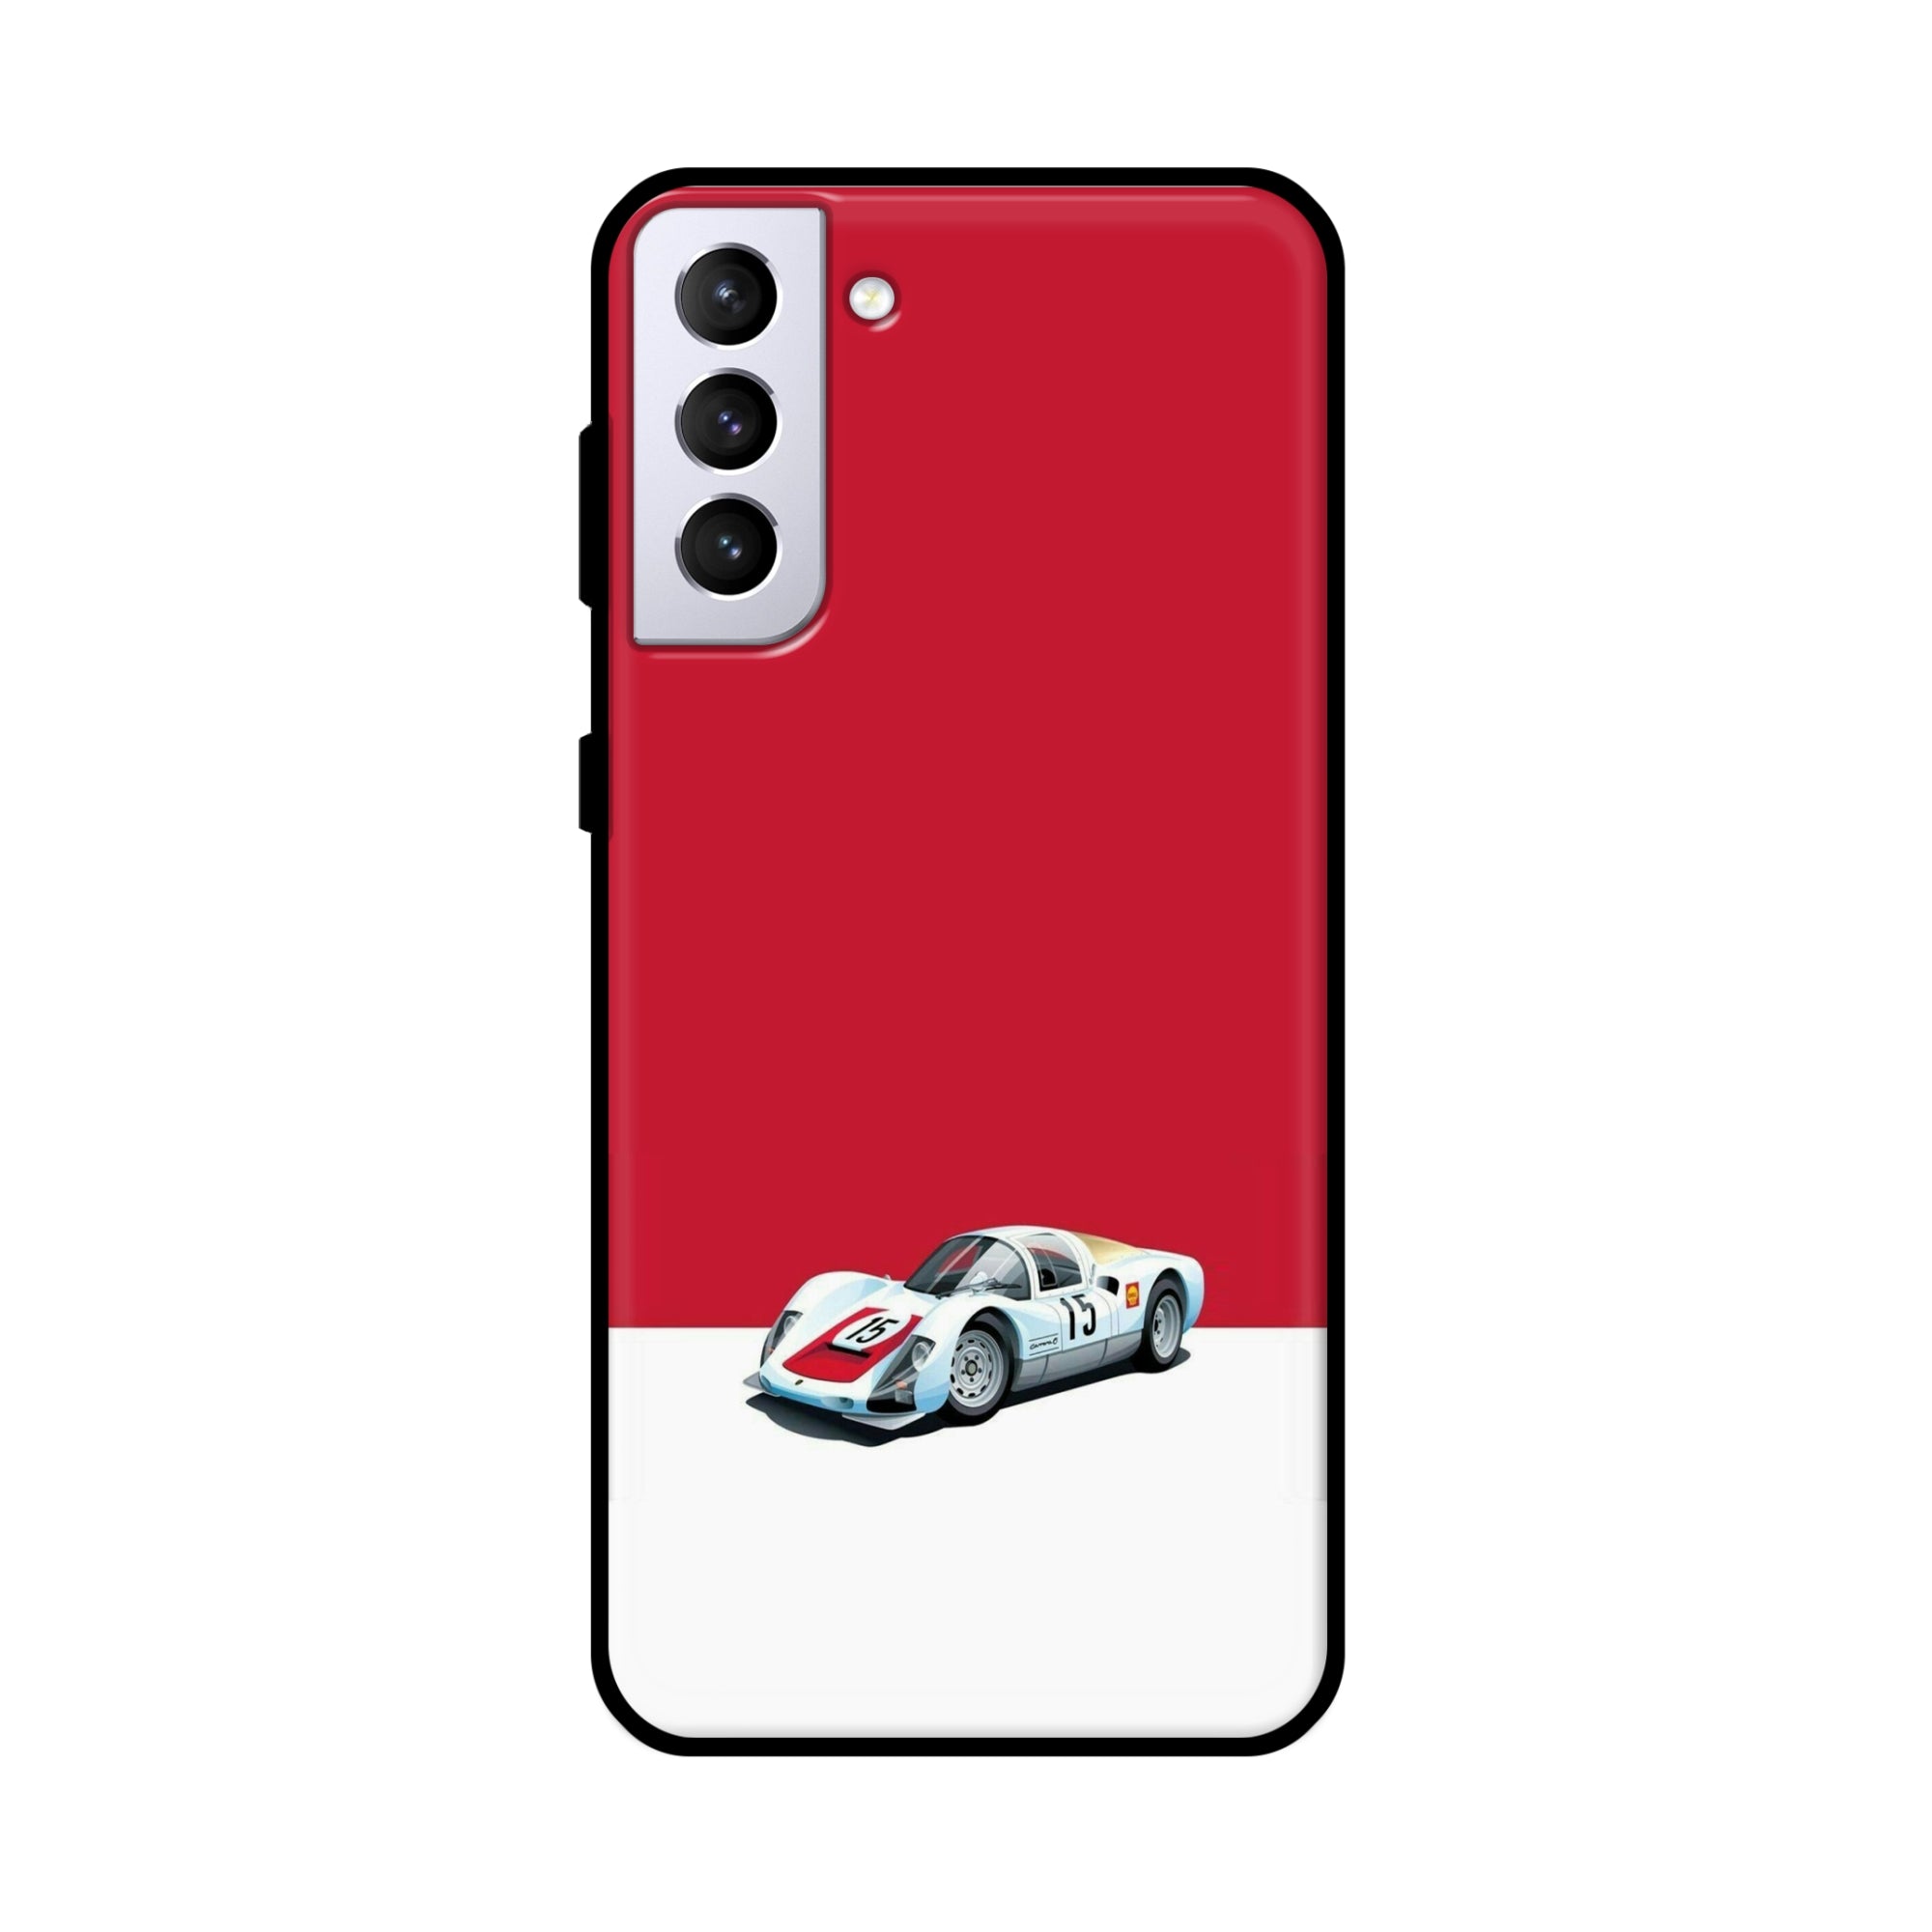 Buy Ferrari F15 Metal-Silicon Back Mobile Phone Case/Cover For Samsung Galaxy S21 Online